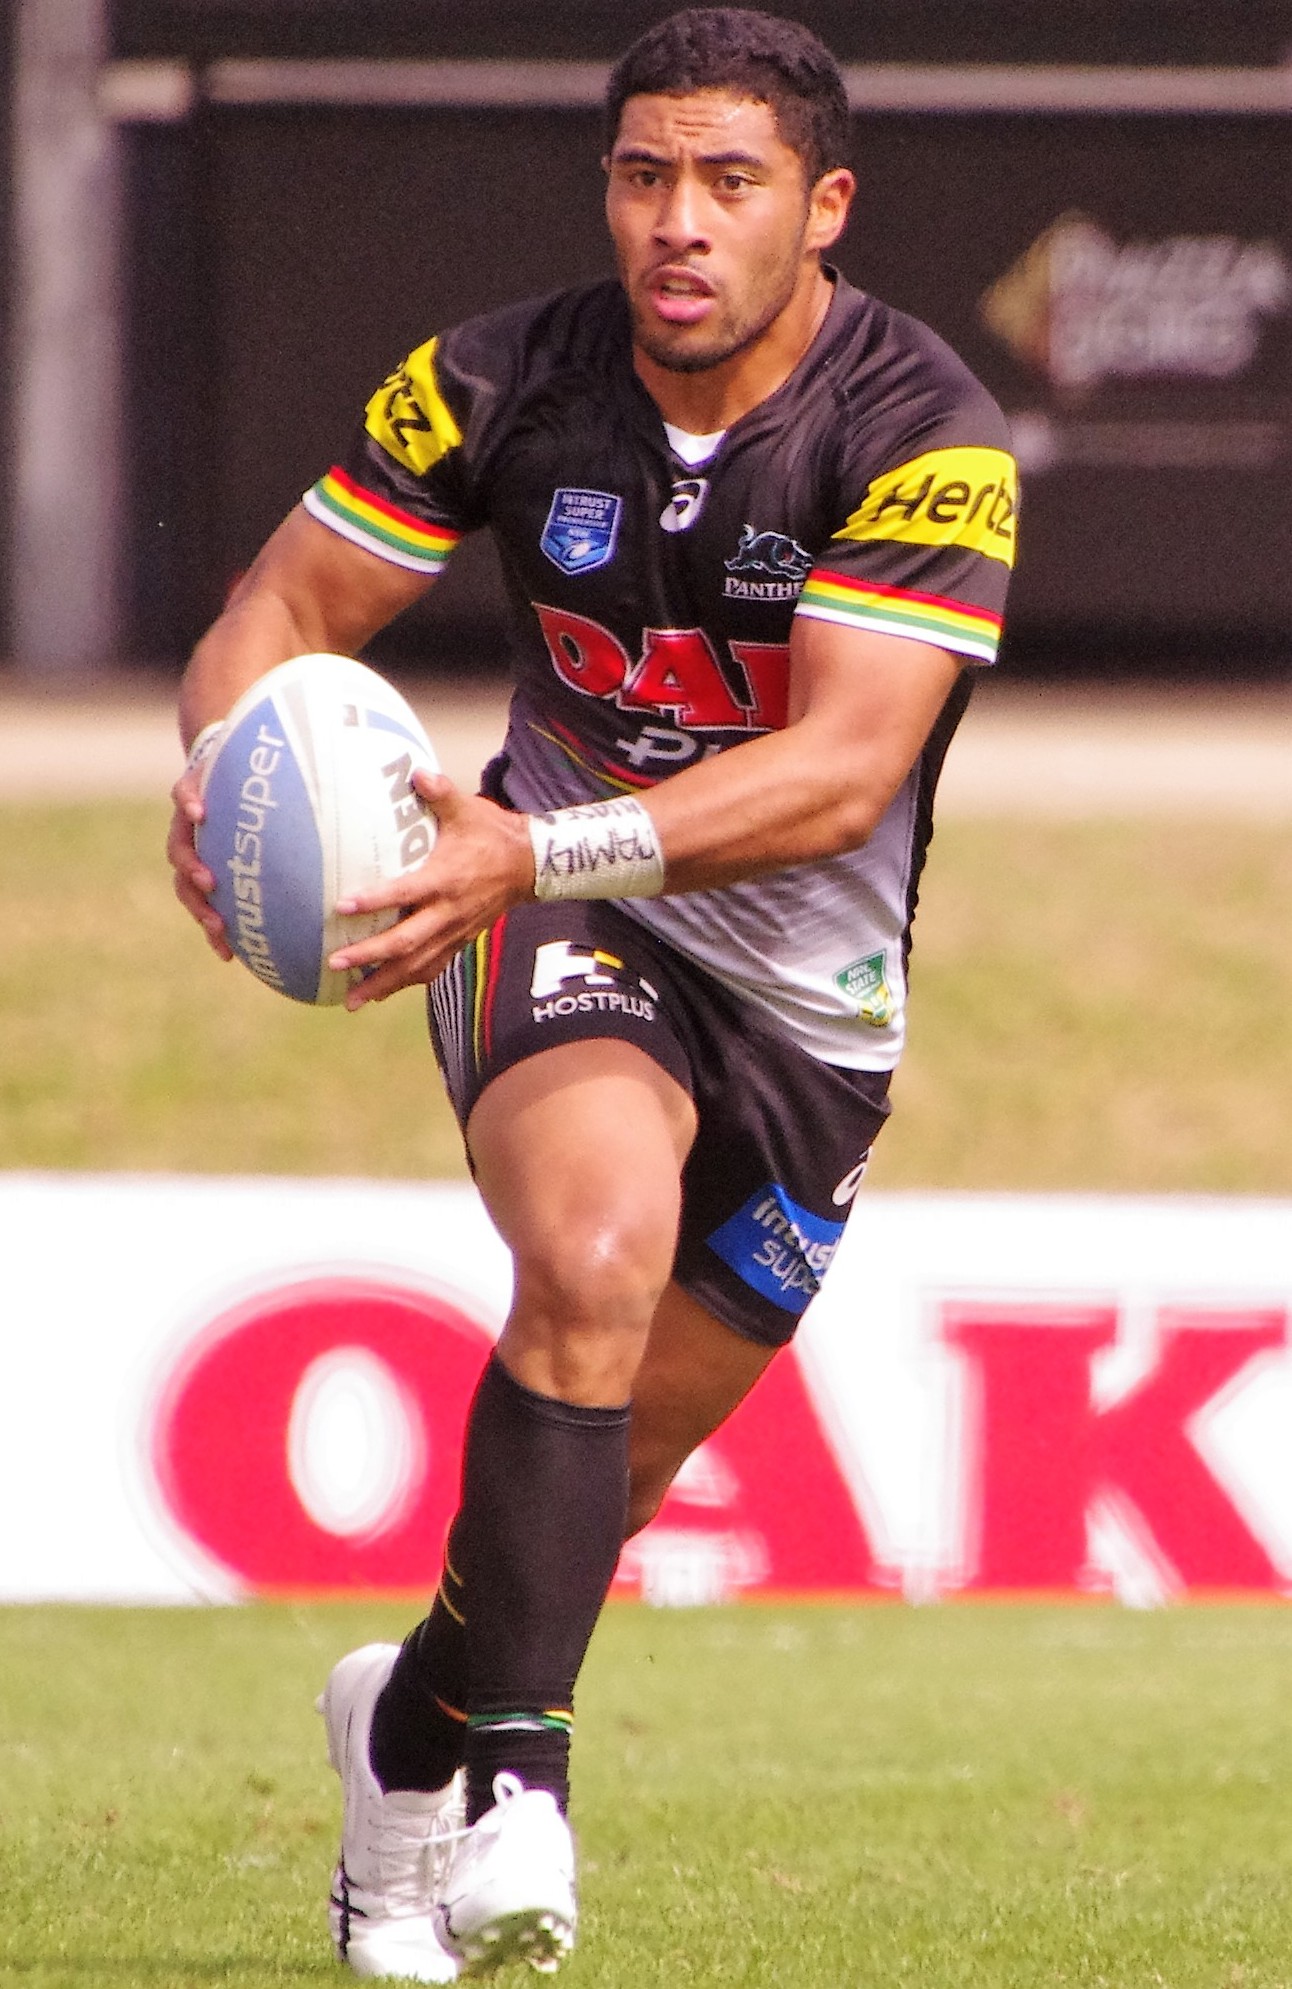 Sione Katoa, New Zealand rugby league player was born on January 26, 1995.